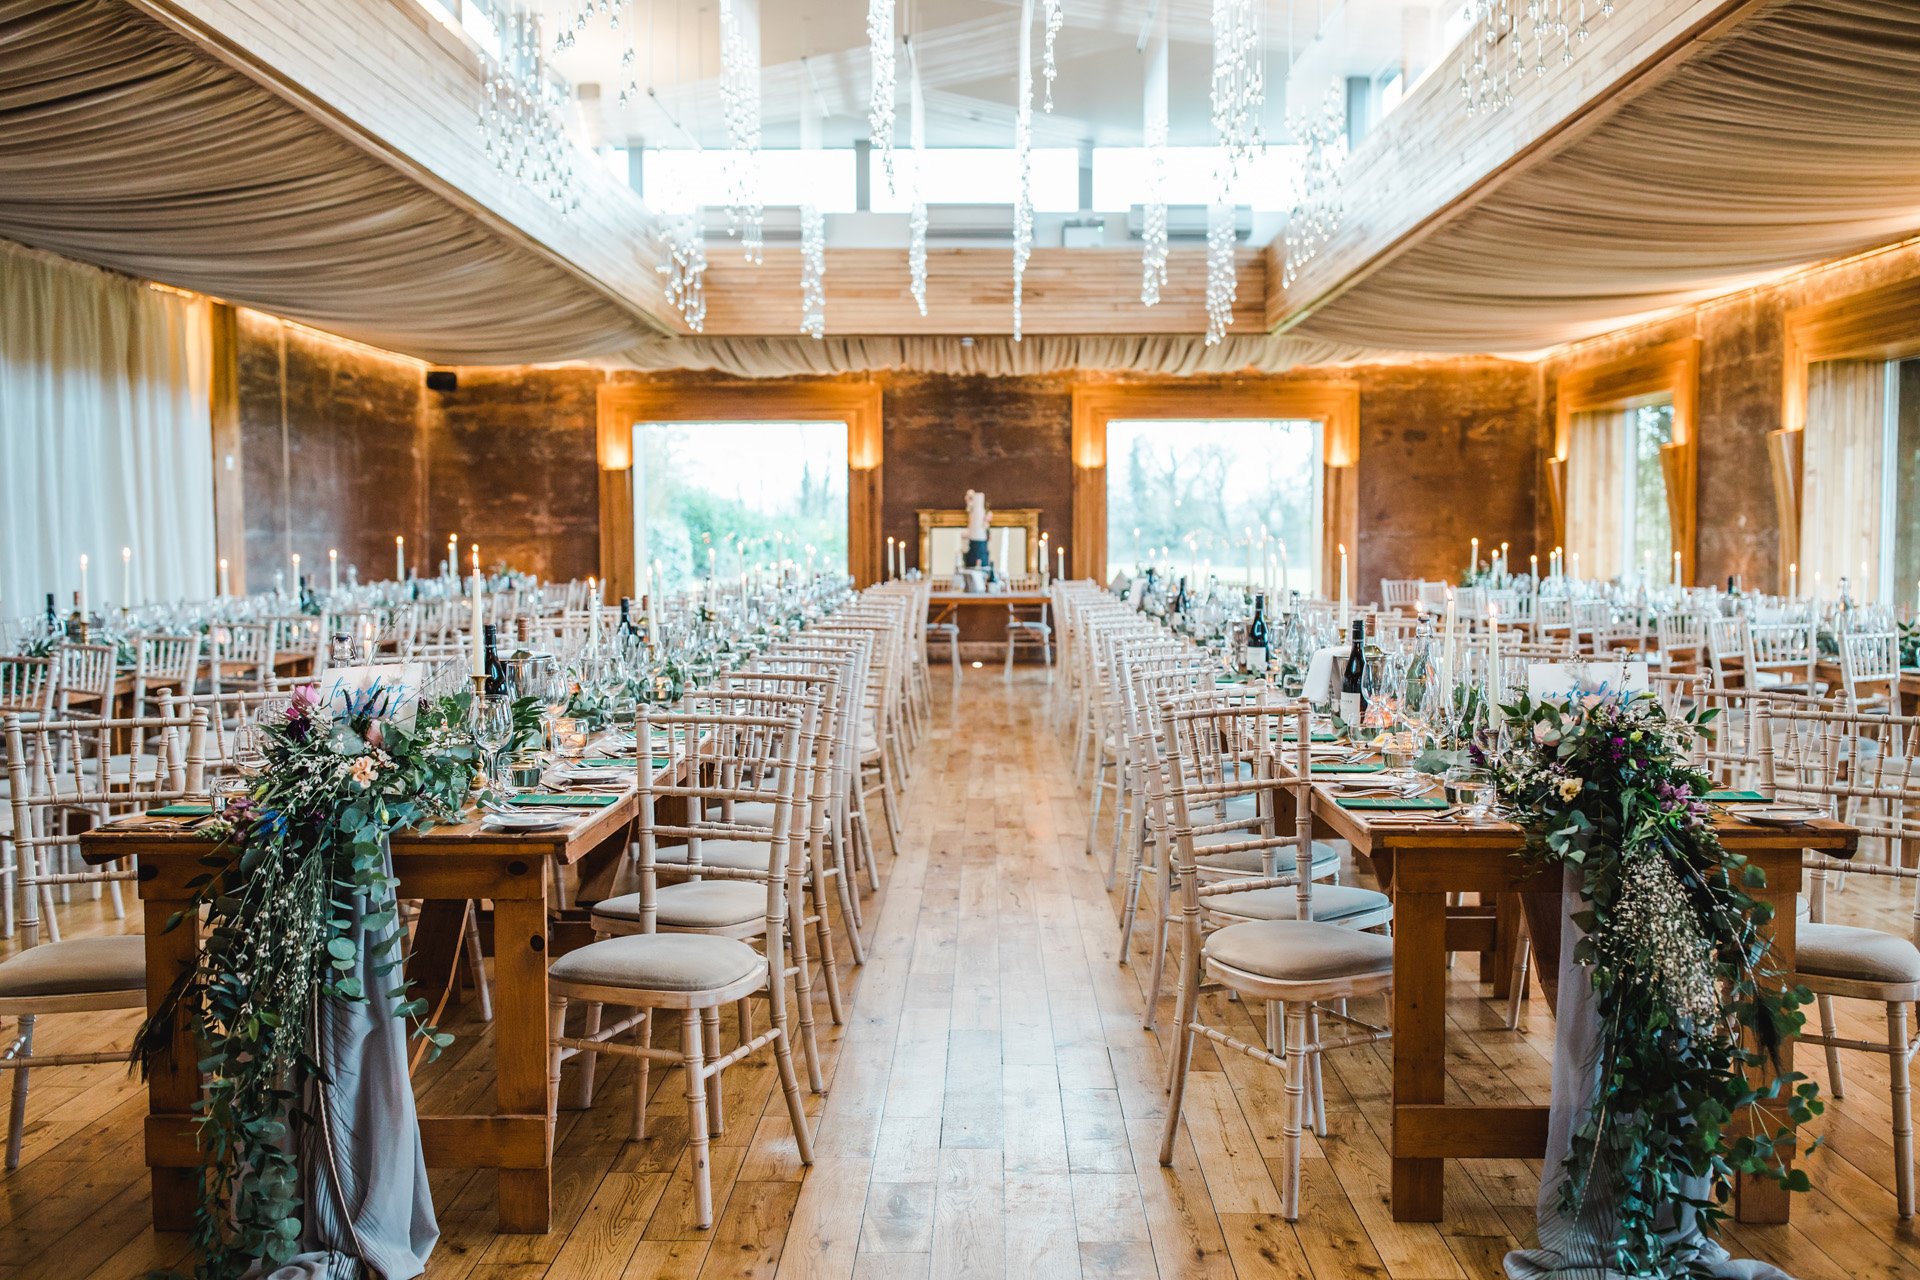 Big wedding reception with long tables and greenery and candles for day 2 of an epic weekend wedding